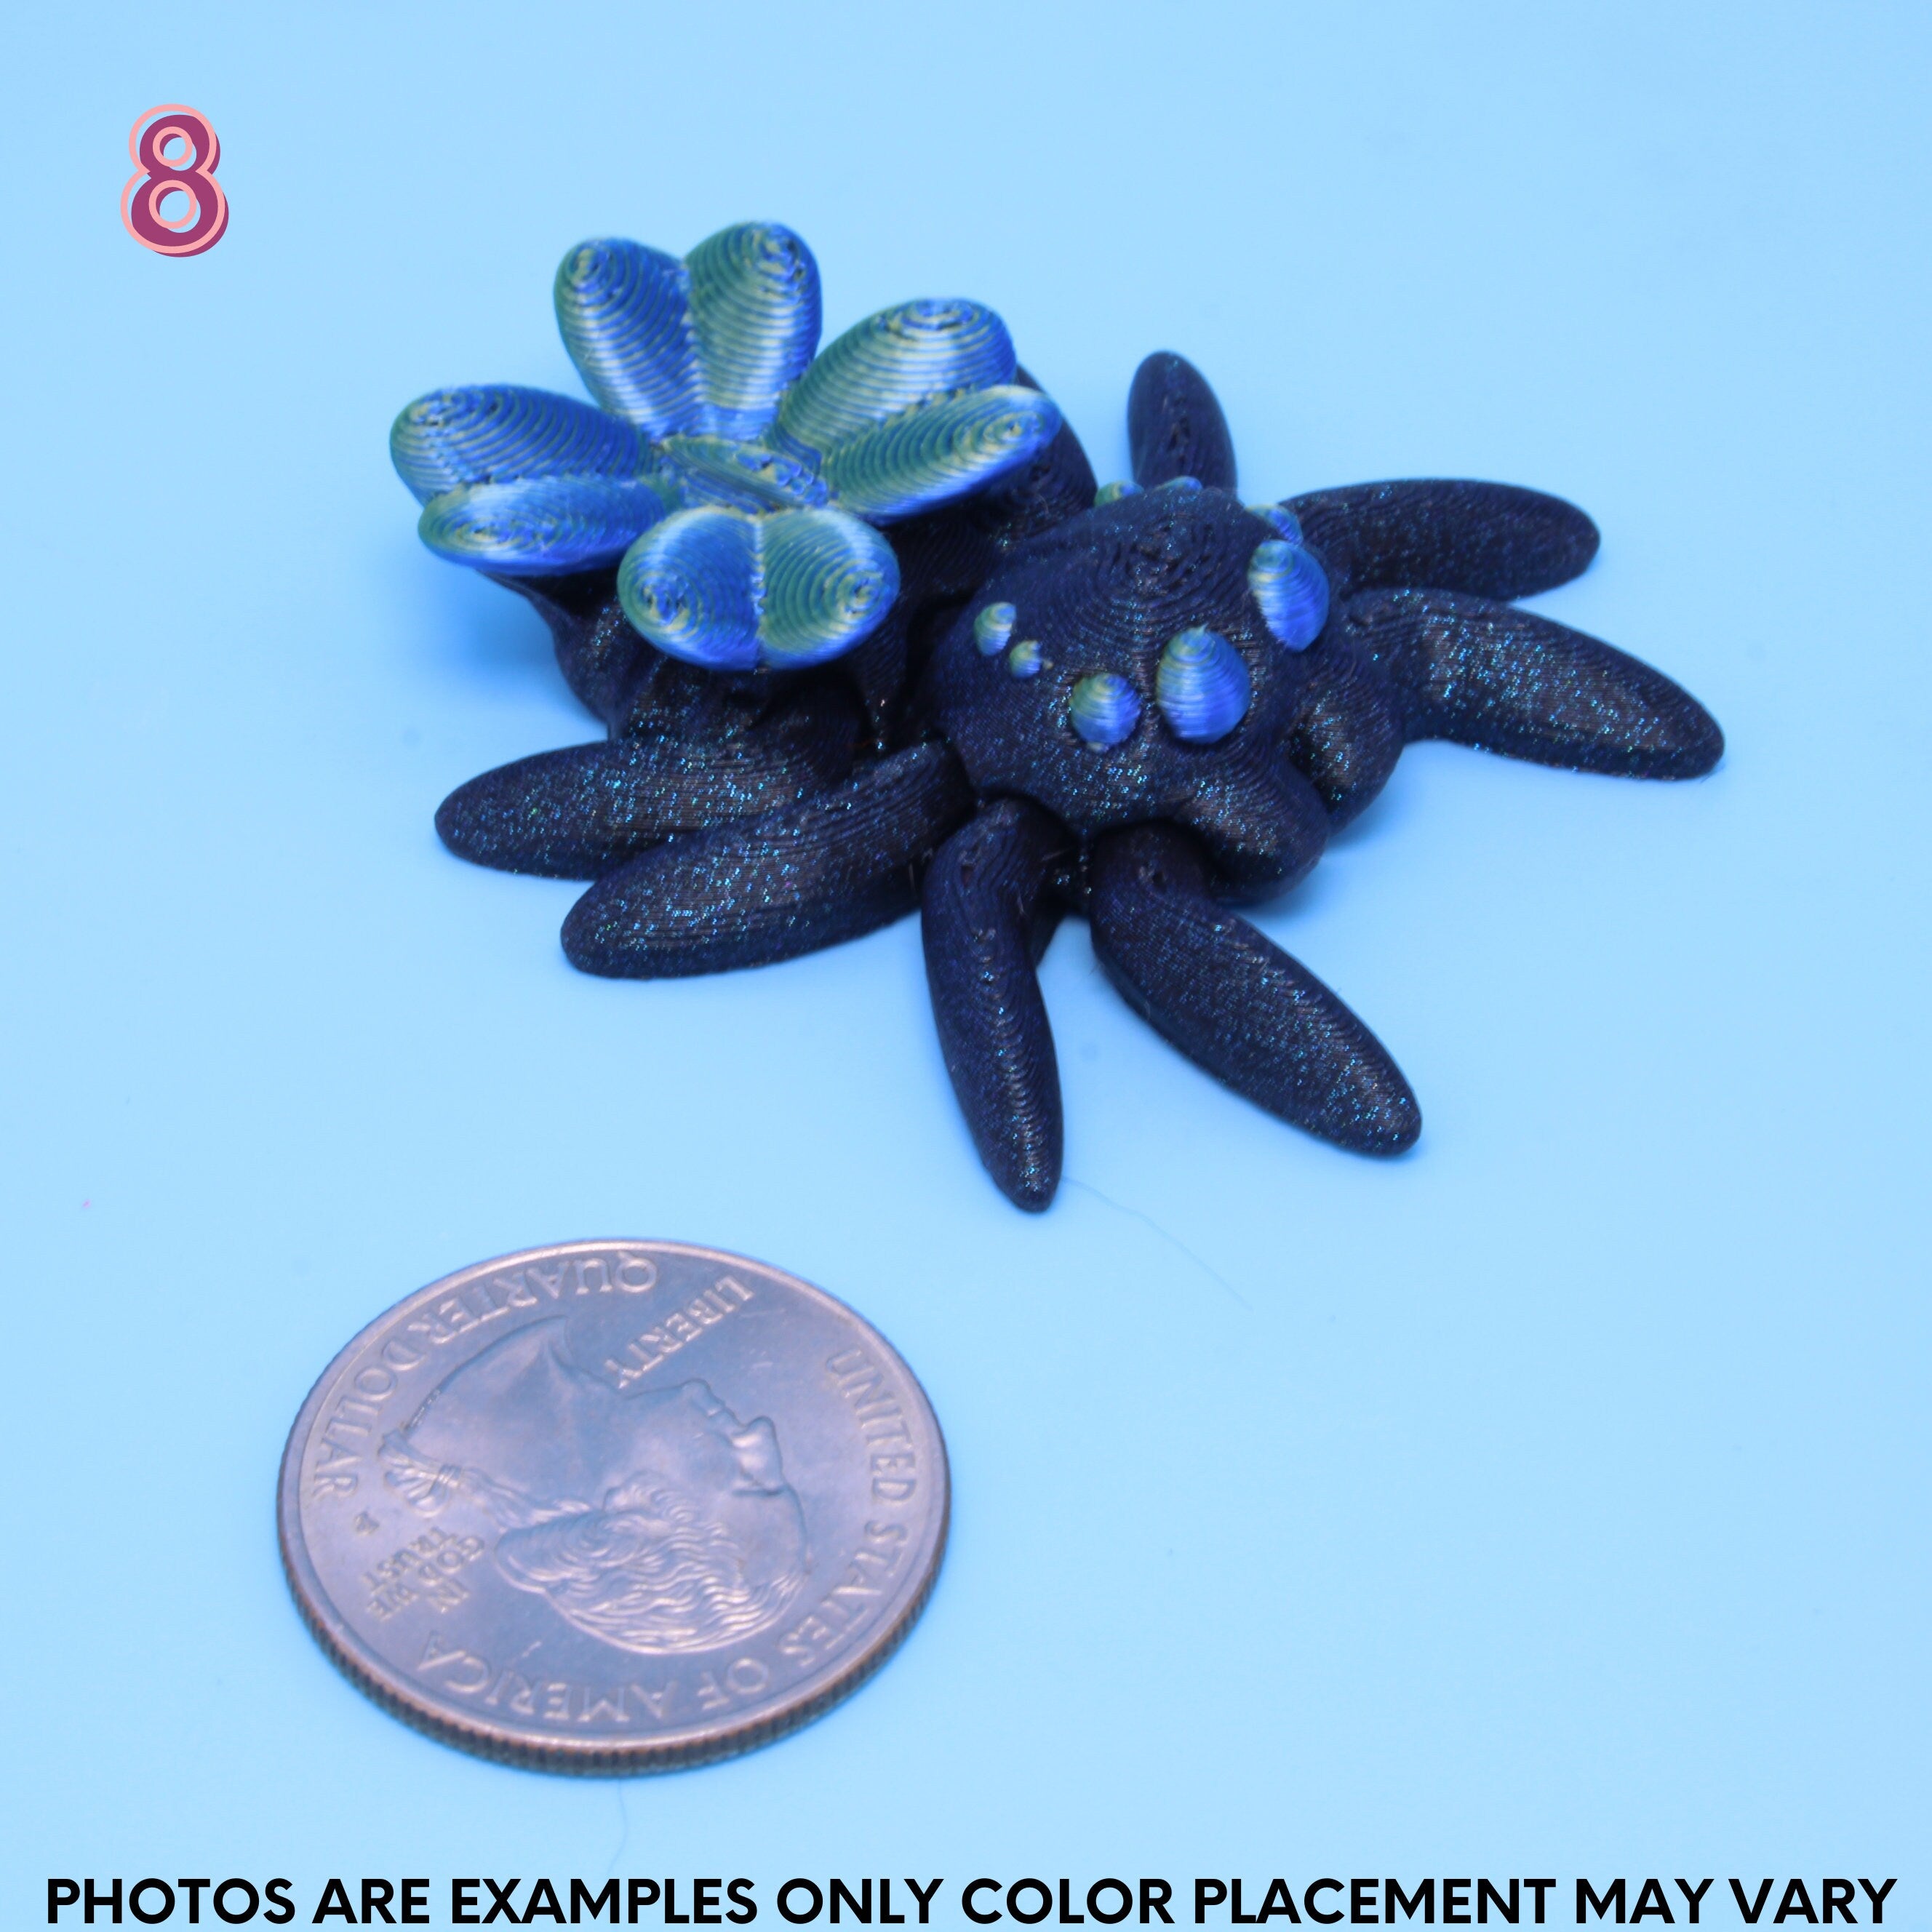 Tiny Spider with Four Leaf Clover- 3D printed